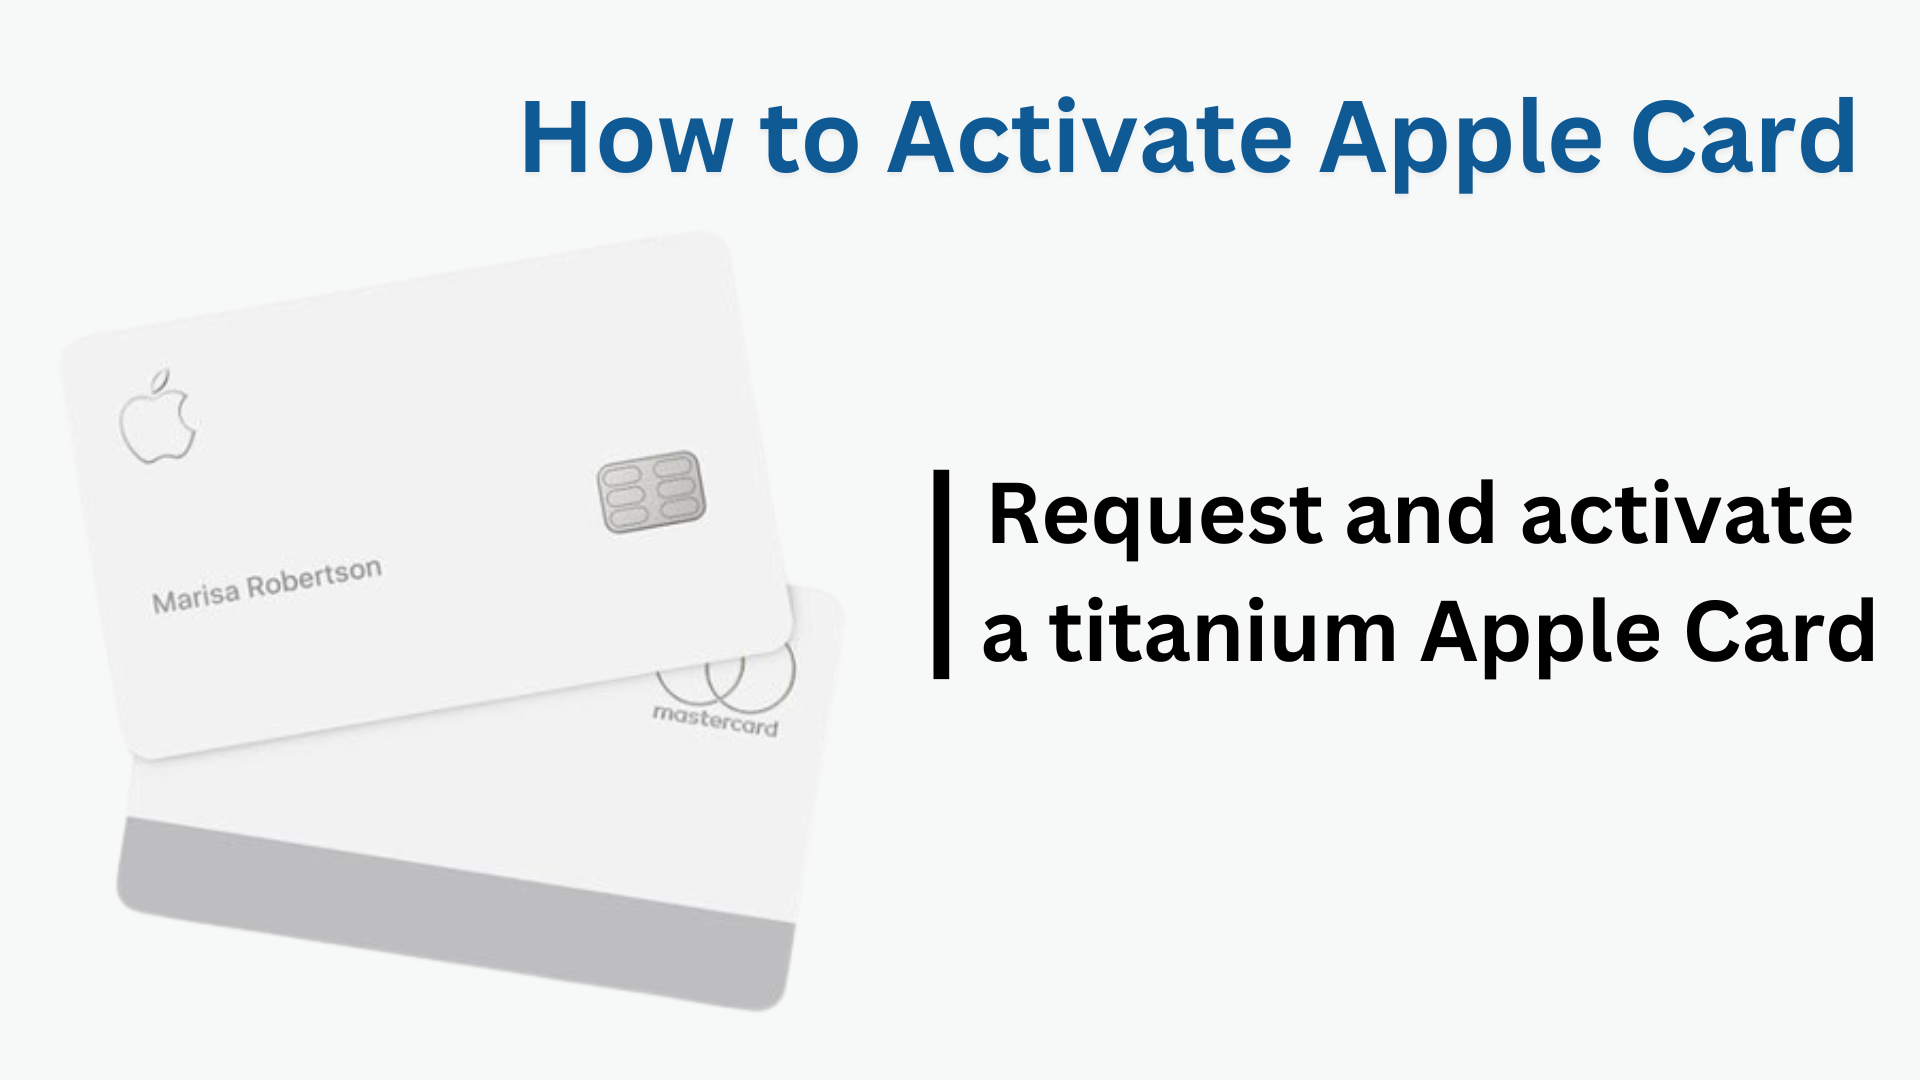 How to Activate Apple Card: Request and activate a titanium Apple Card